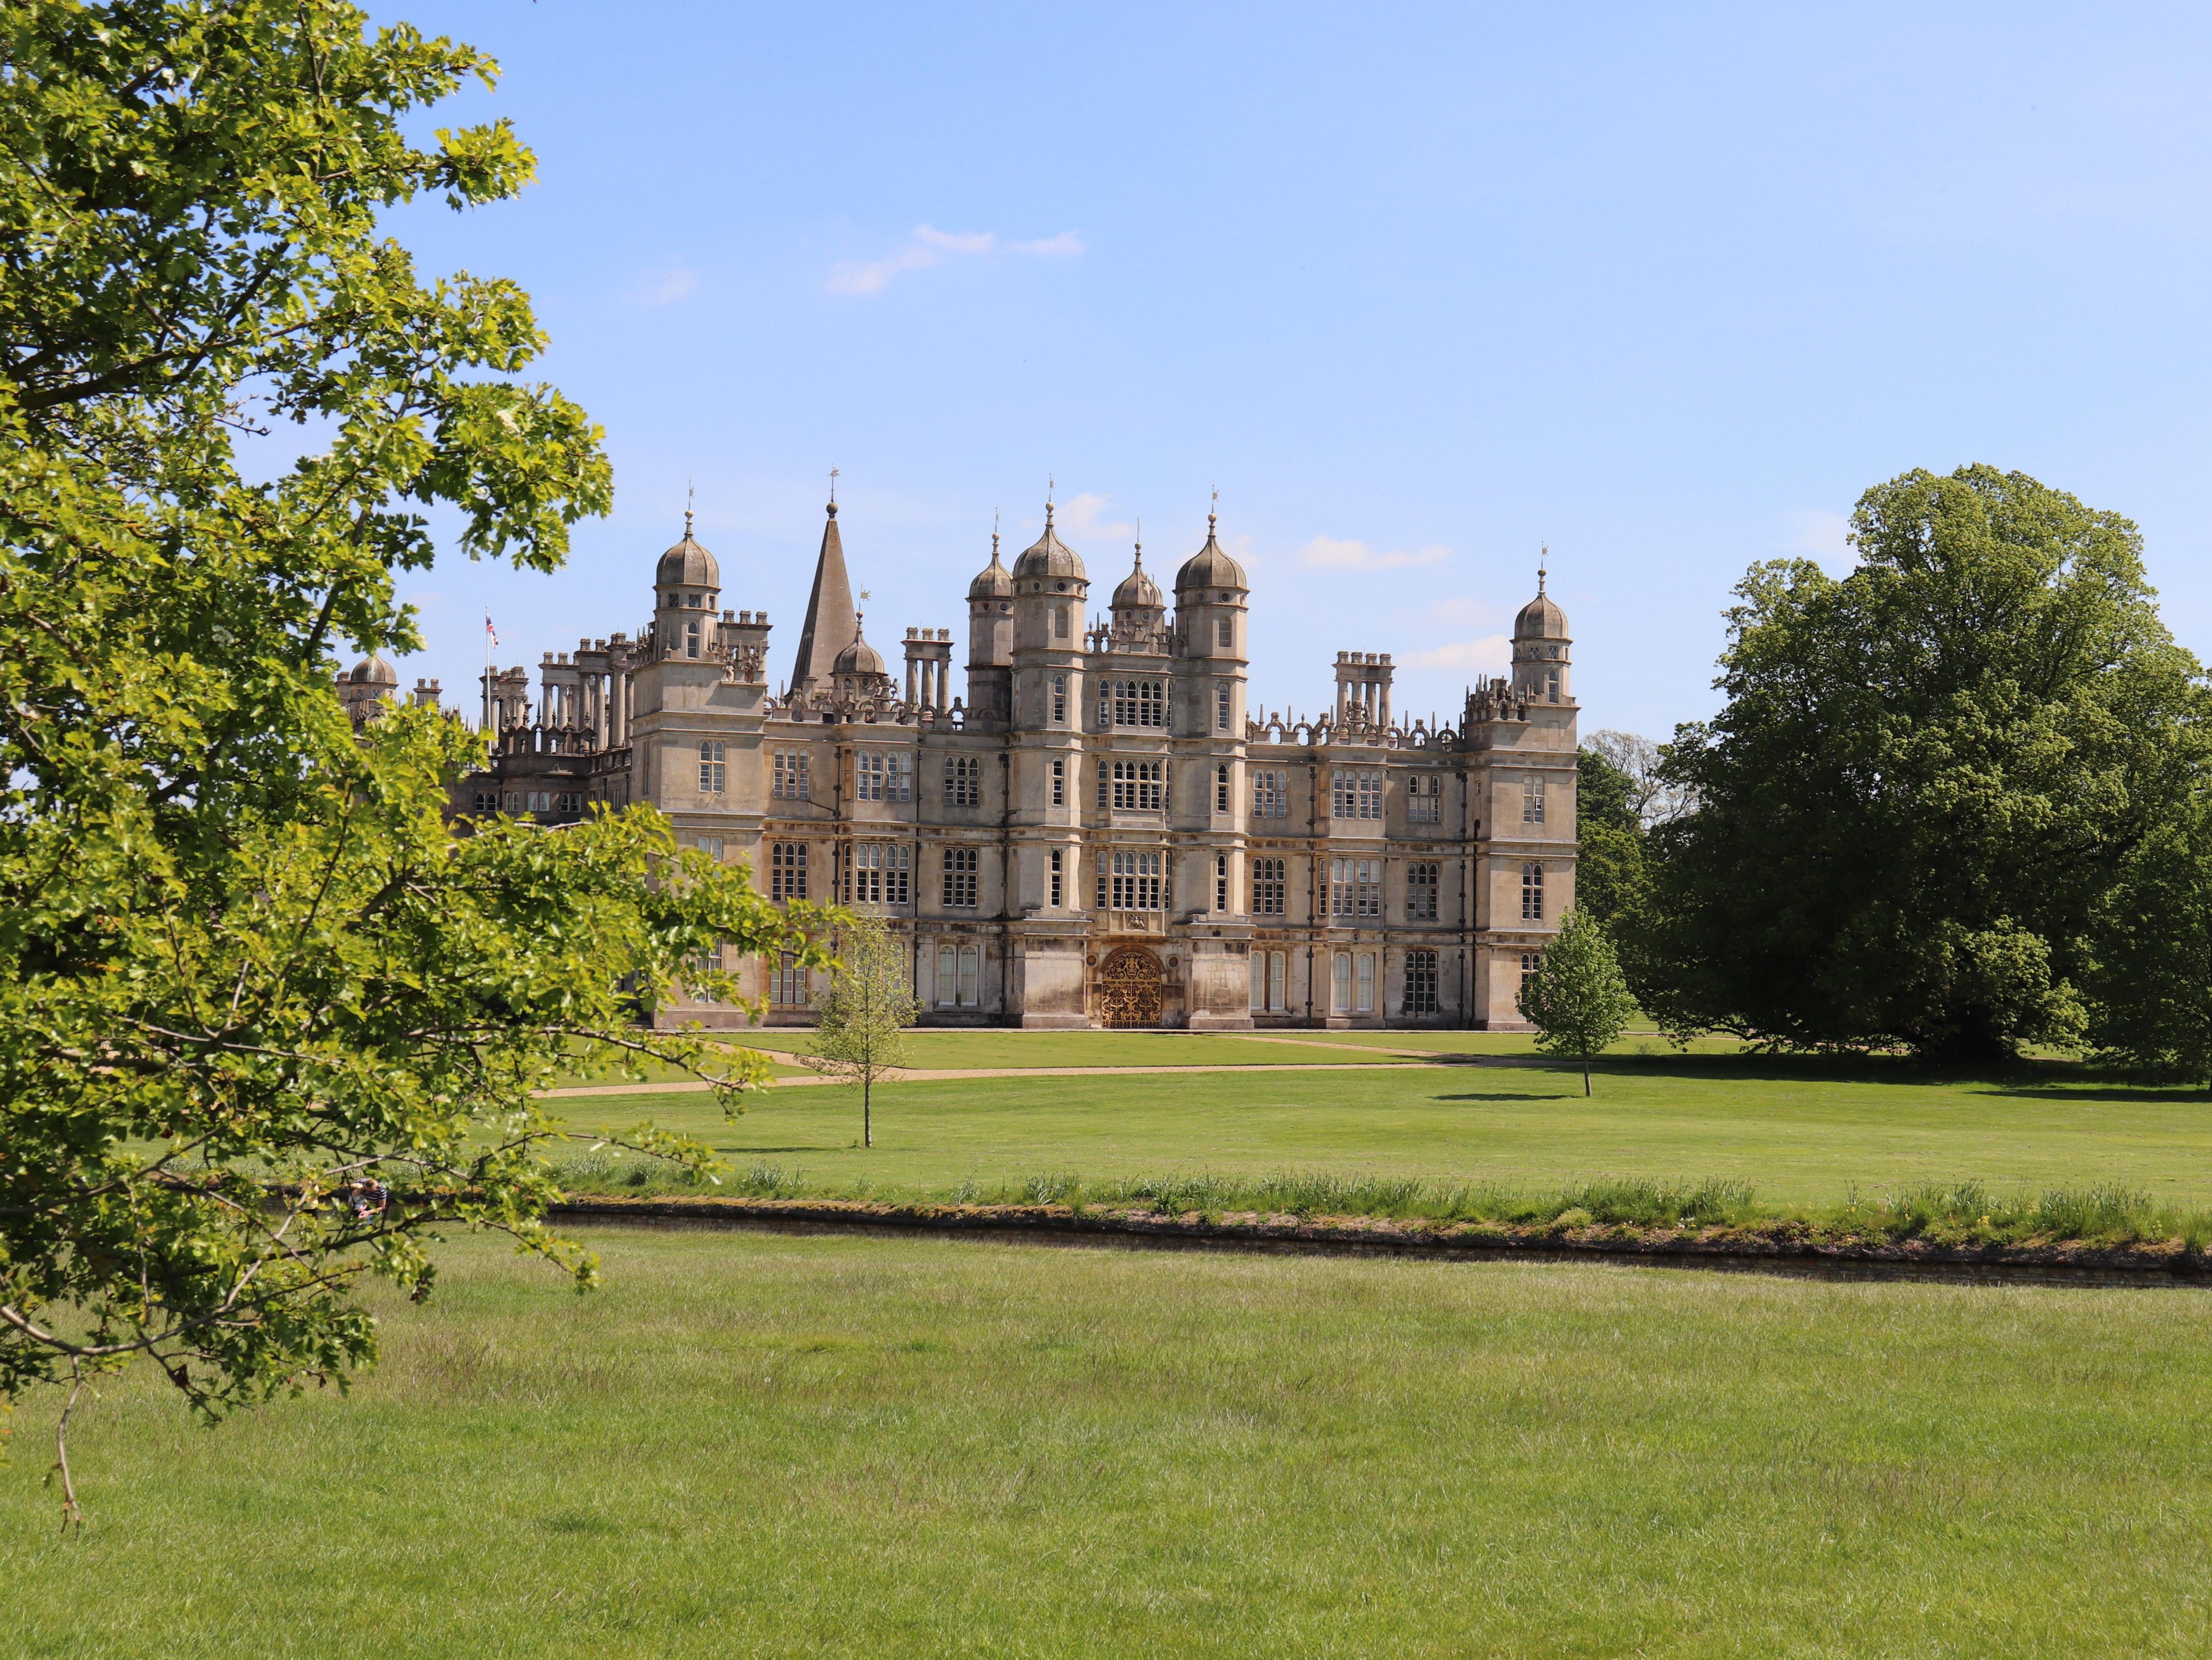 Burghley House is a 20-minute drive from our Peterborough hotel.